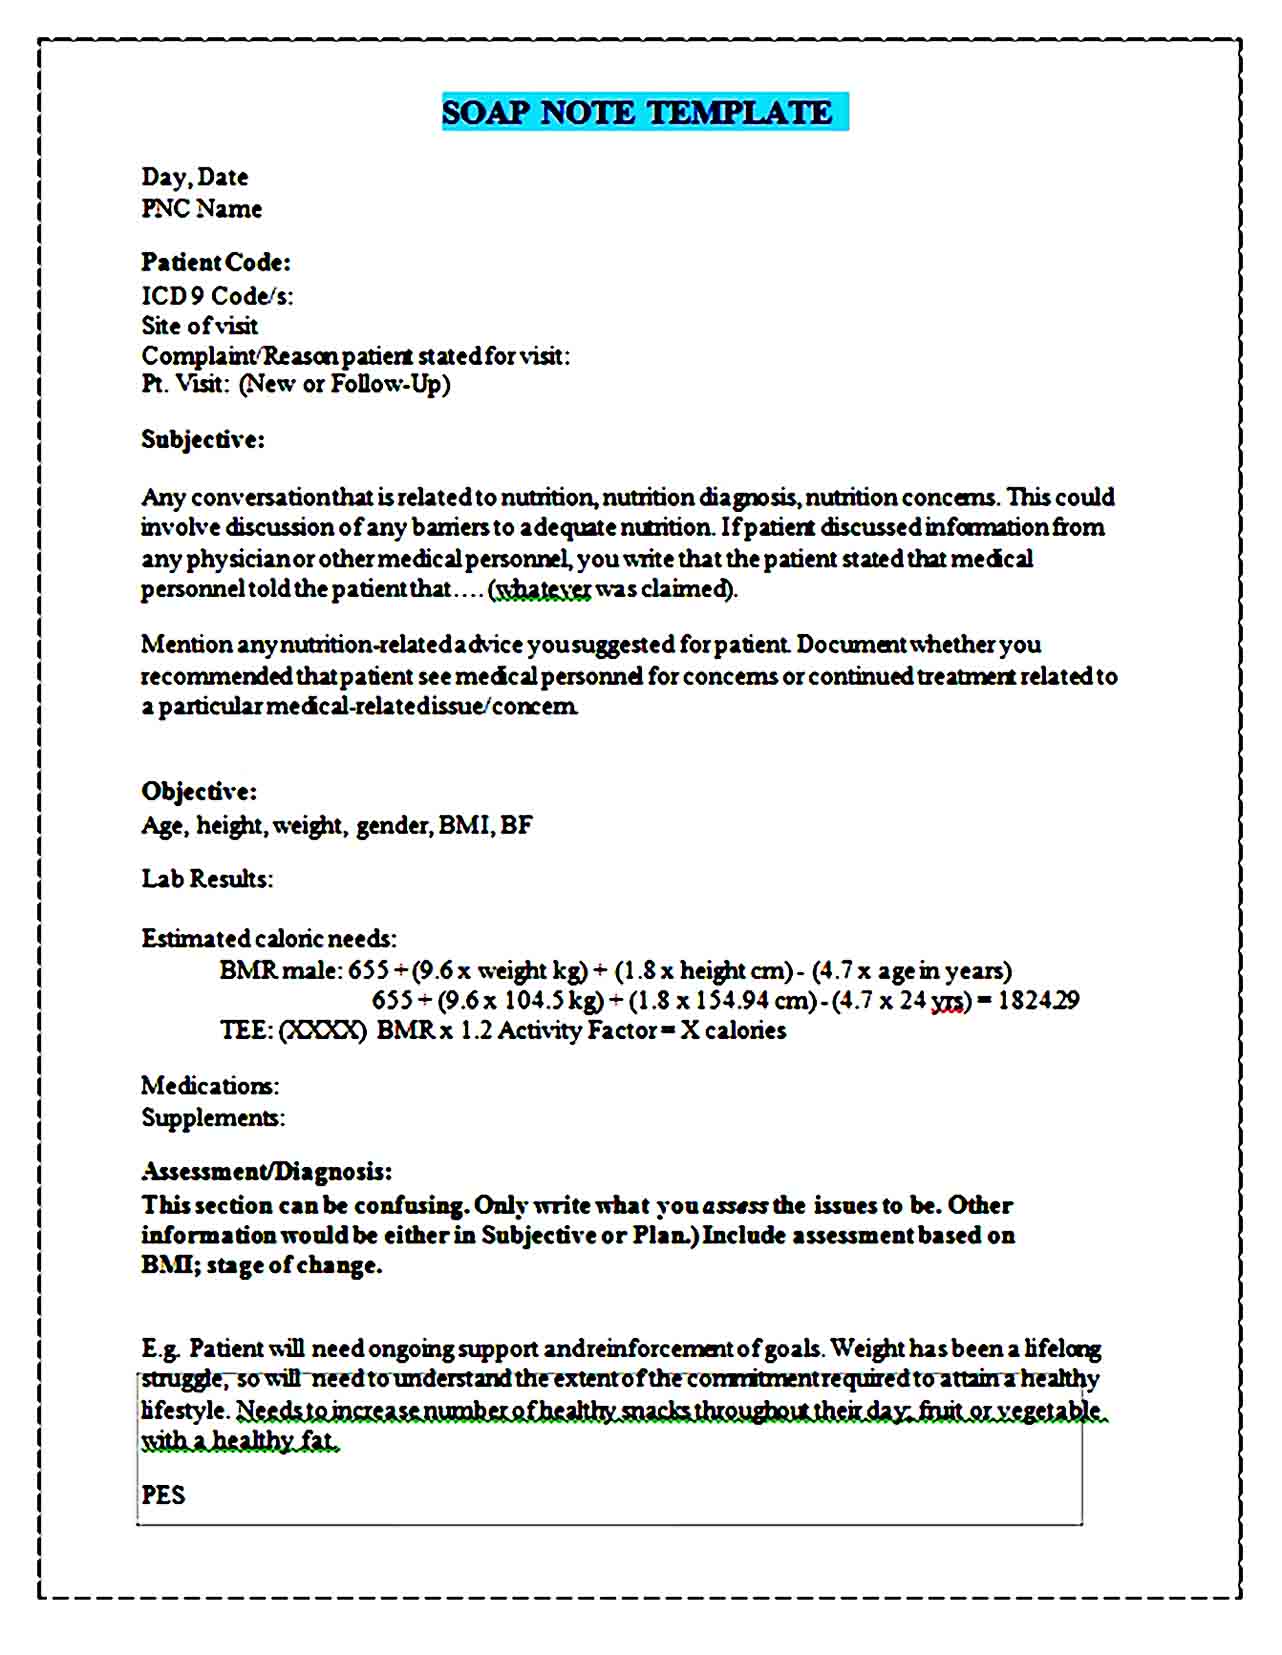 Soap Note Template 15